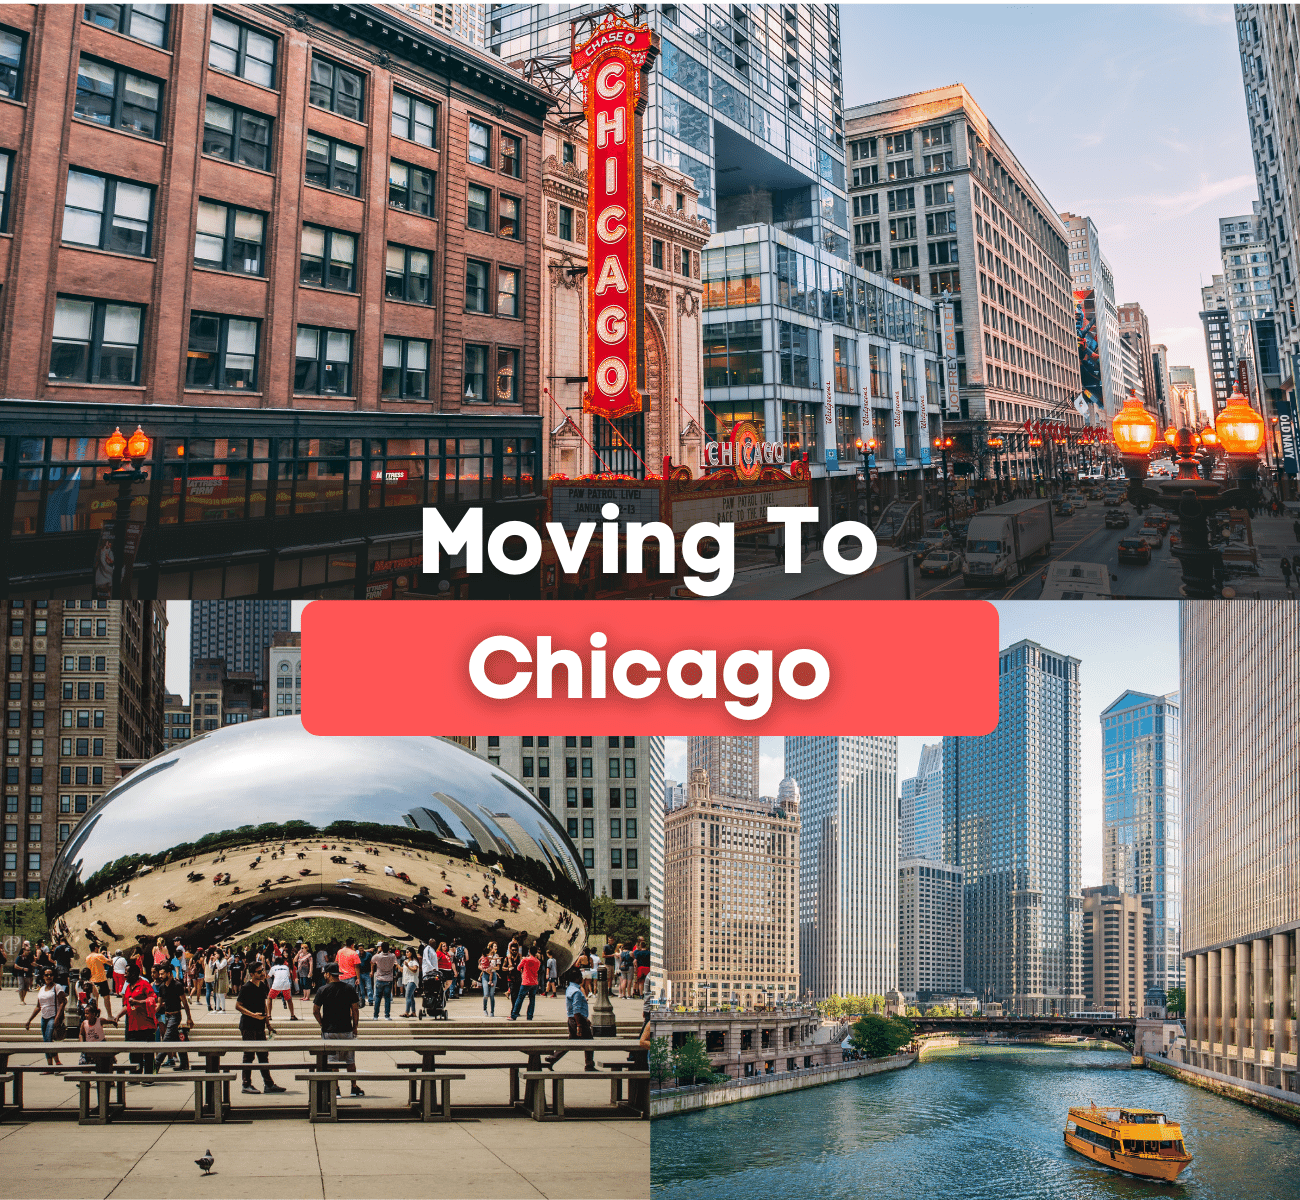 Moving to Chicago - What is it like living in Chicago?